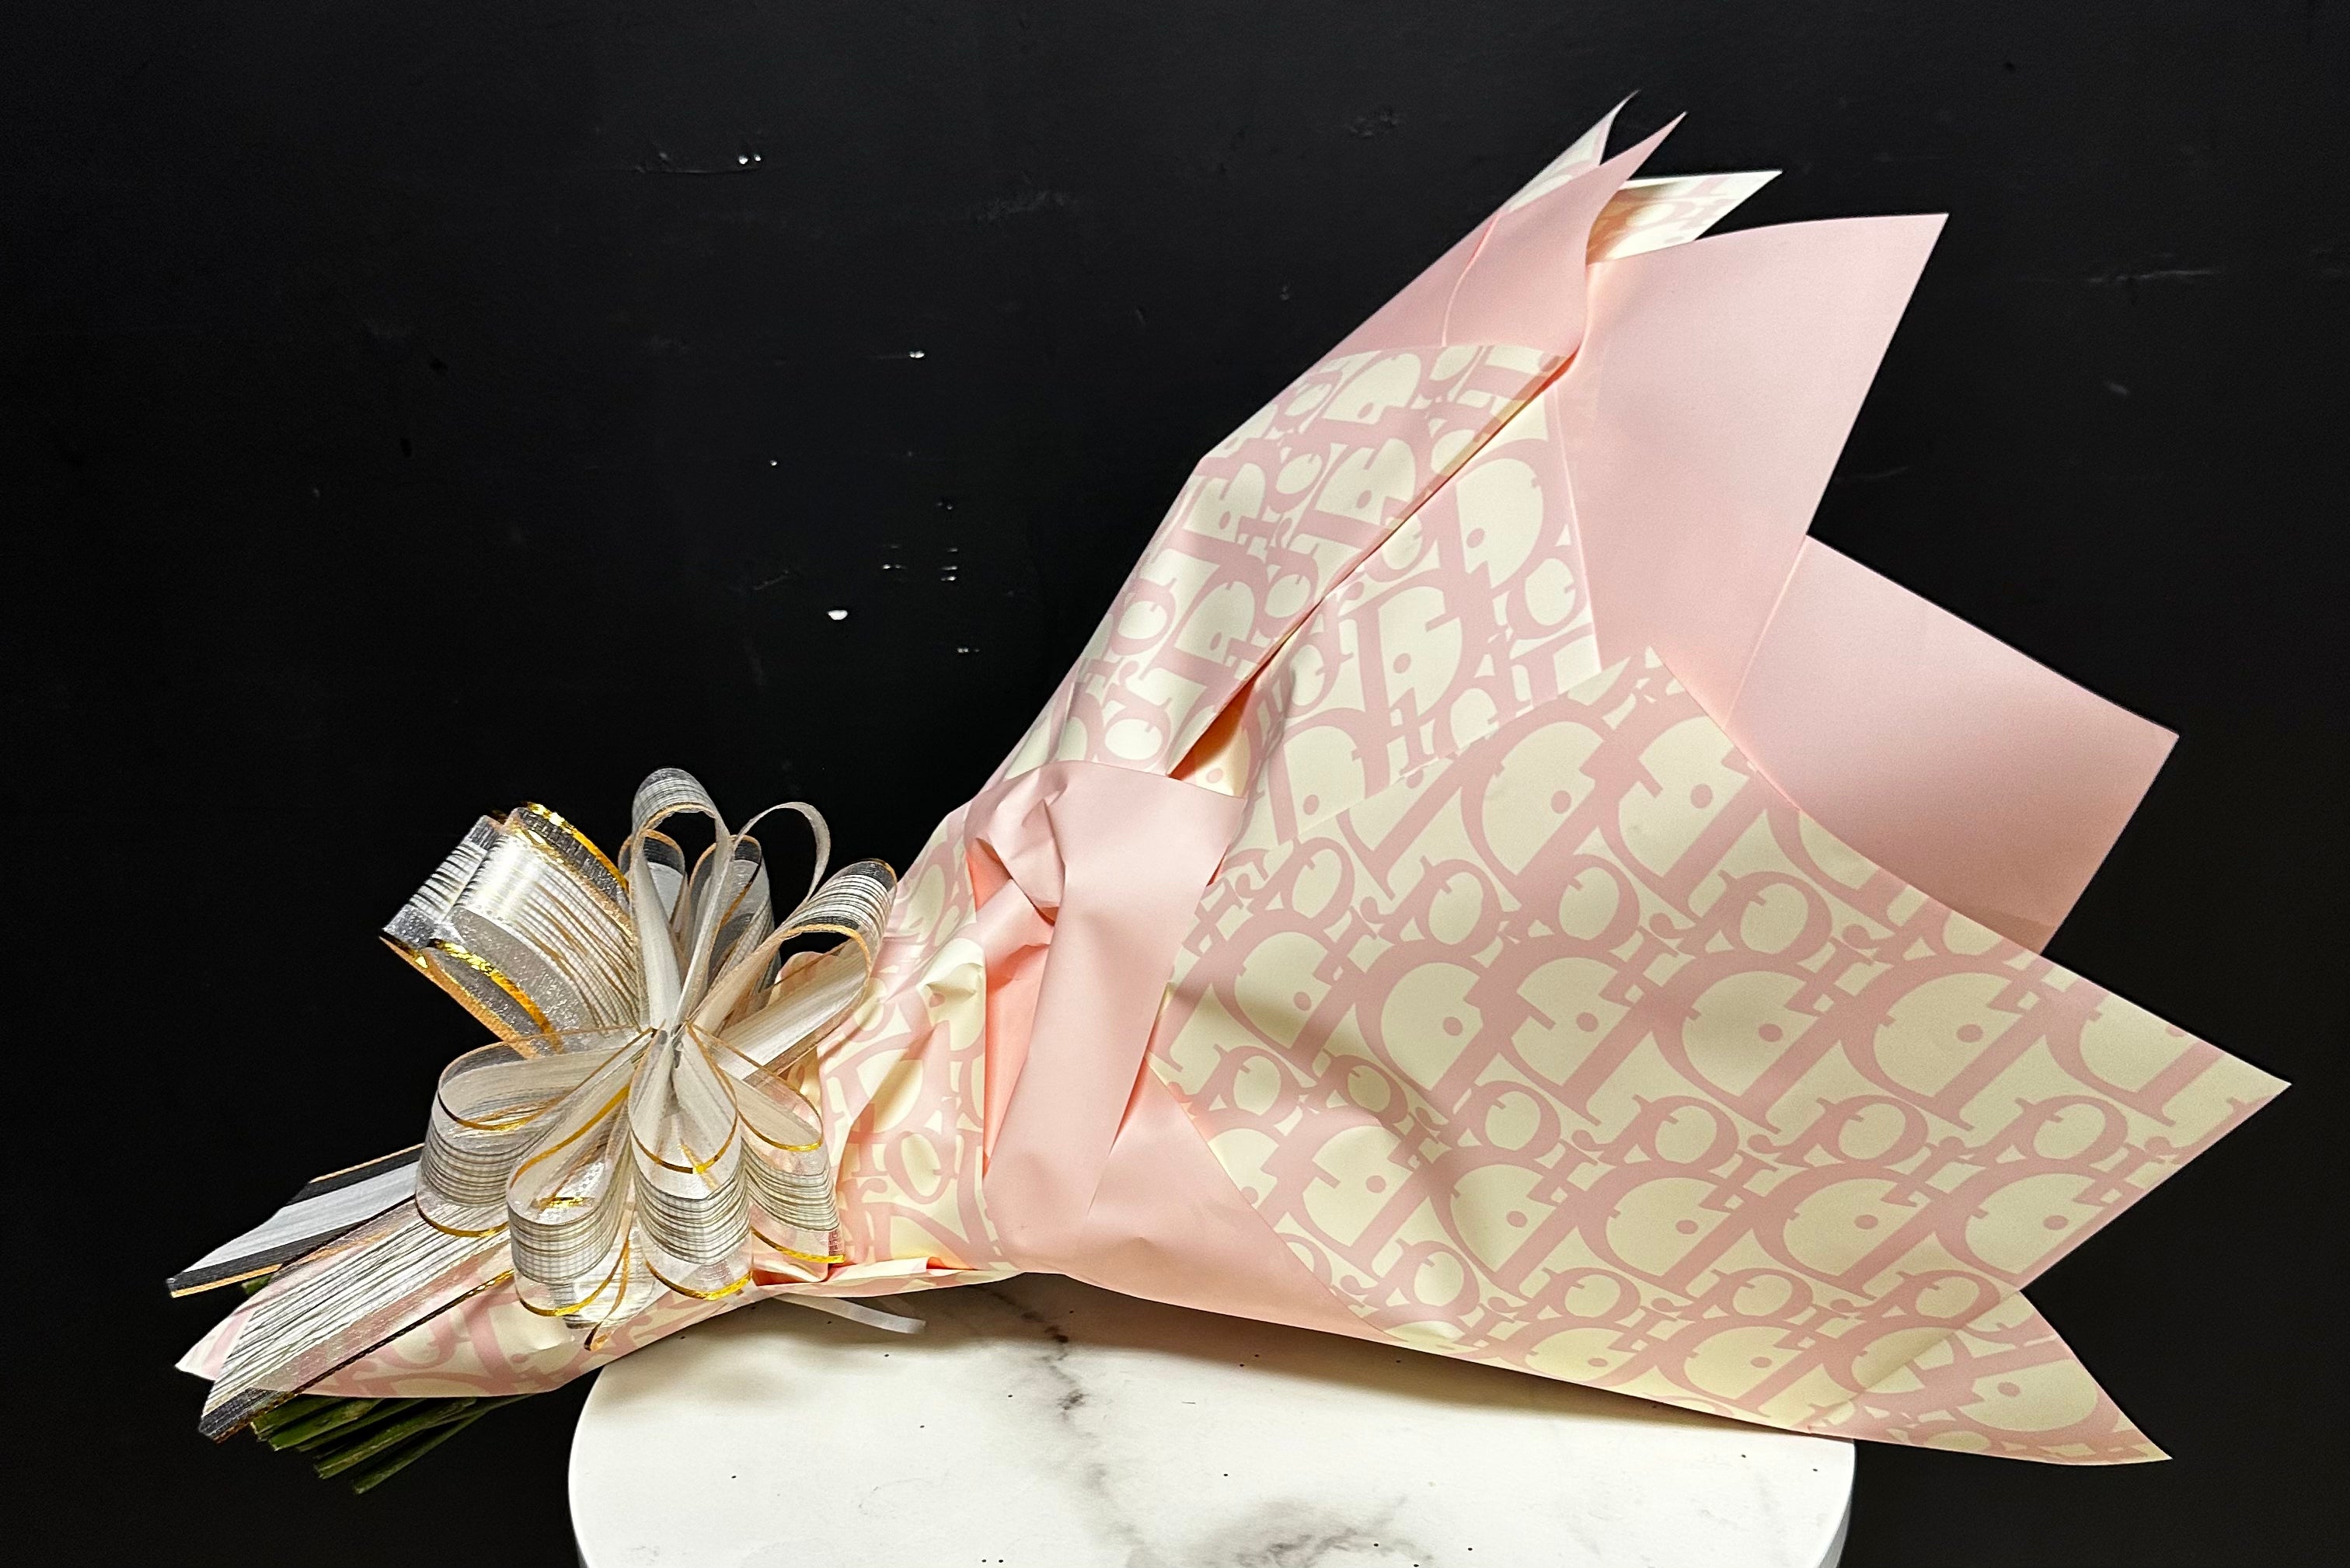 Houston Tx. Florist🌹 on Instagram: Elevate your gift-giving experience  with our luxurious crafted wrapping paper featuring stunning Dior-inspired  floral designs. • • • #florist #flores #floral #floralarrangement #florals  #floraldesign #rosebouquet